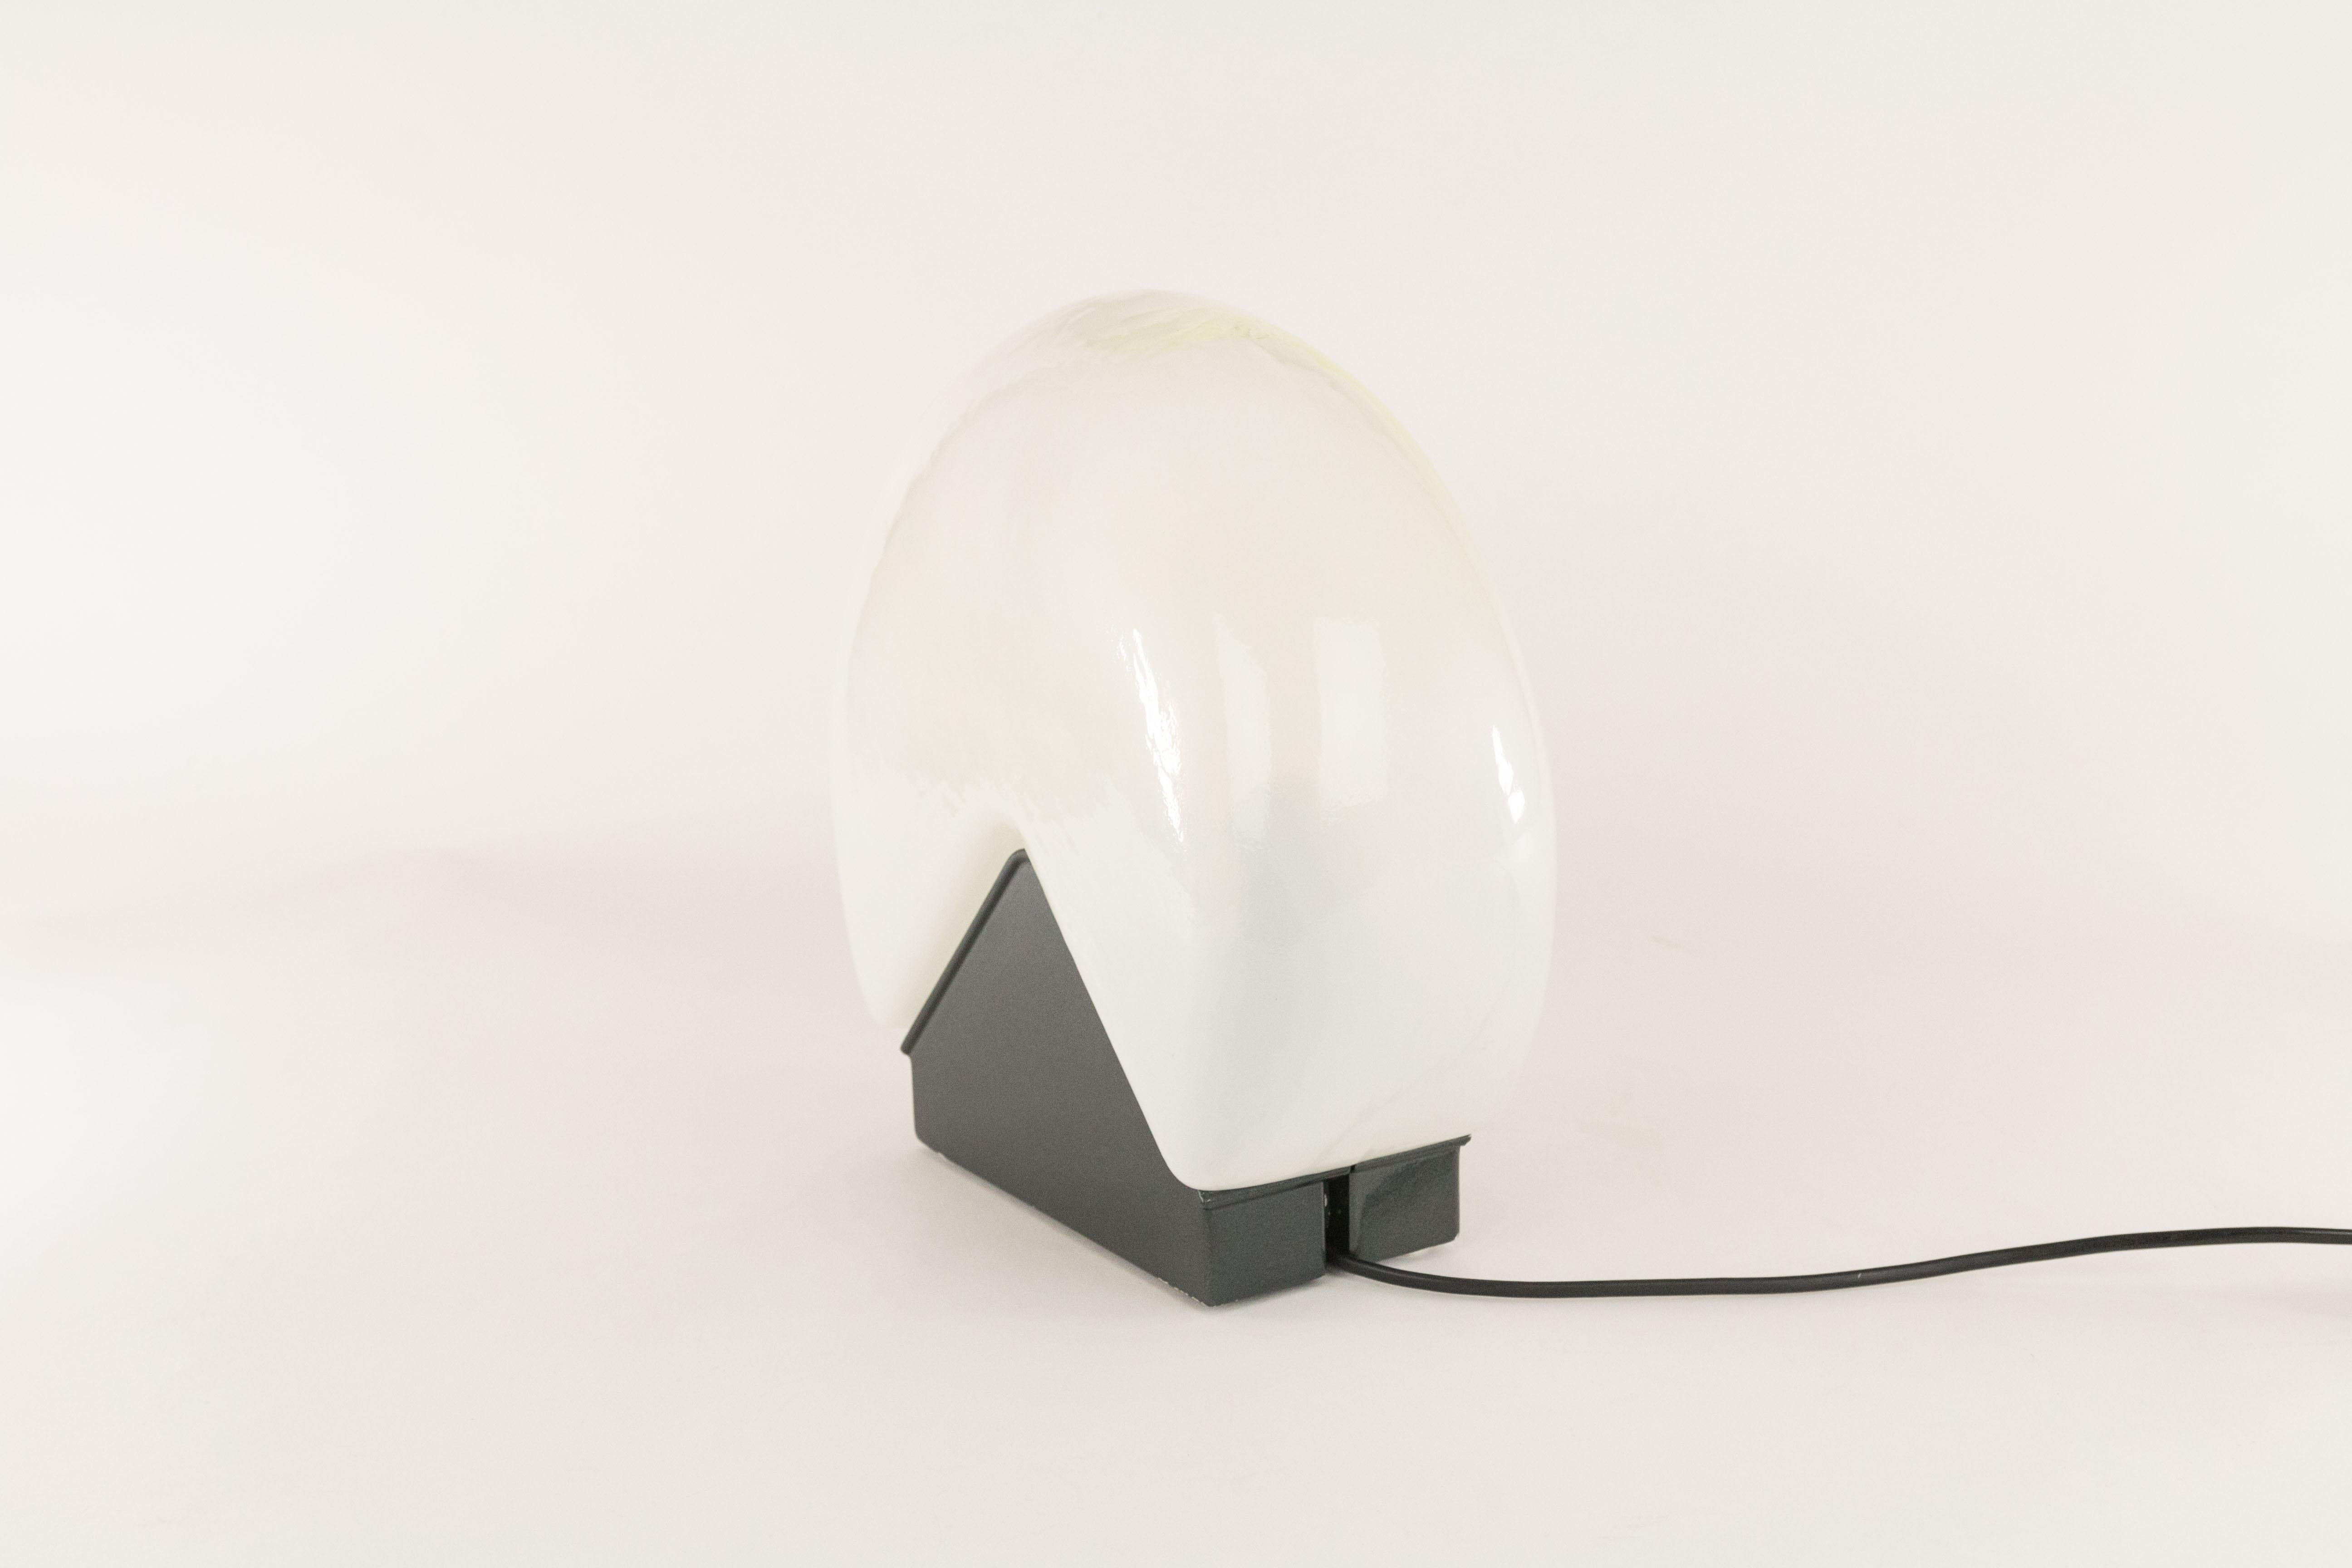 Italian Glass Table Lamp by Roberto Pamio for Leucos from the 1970s For Sale